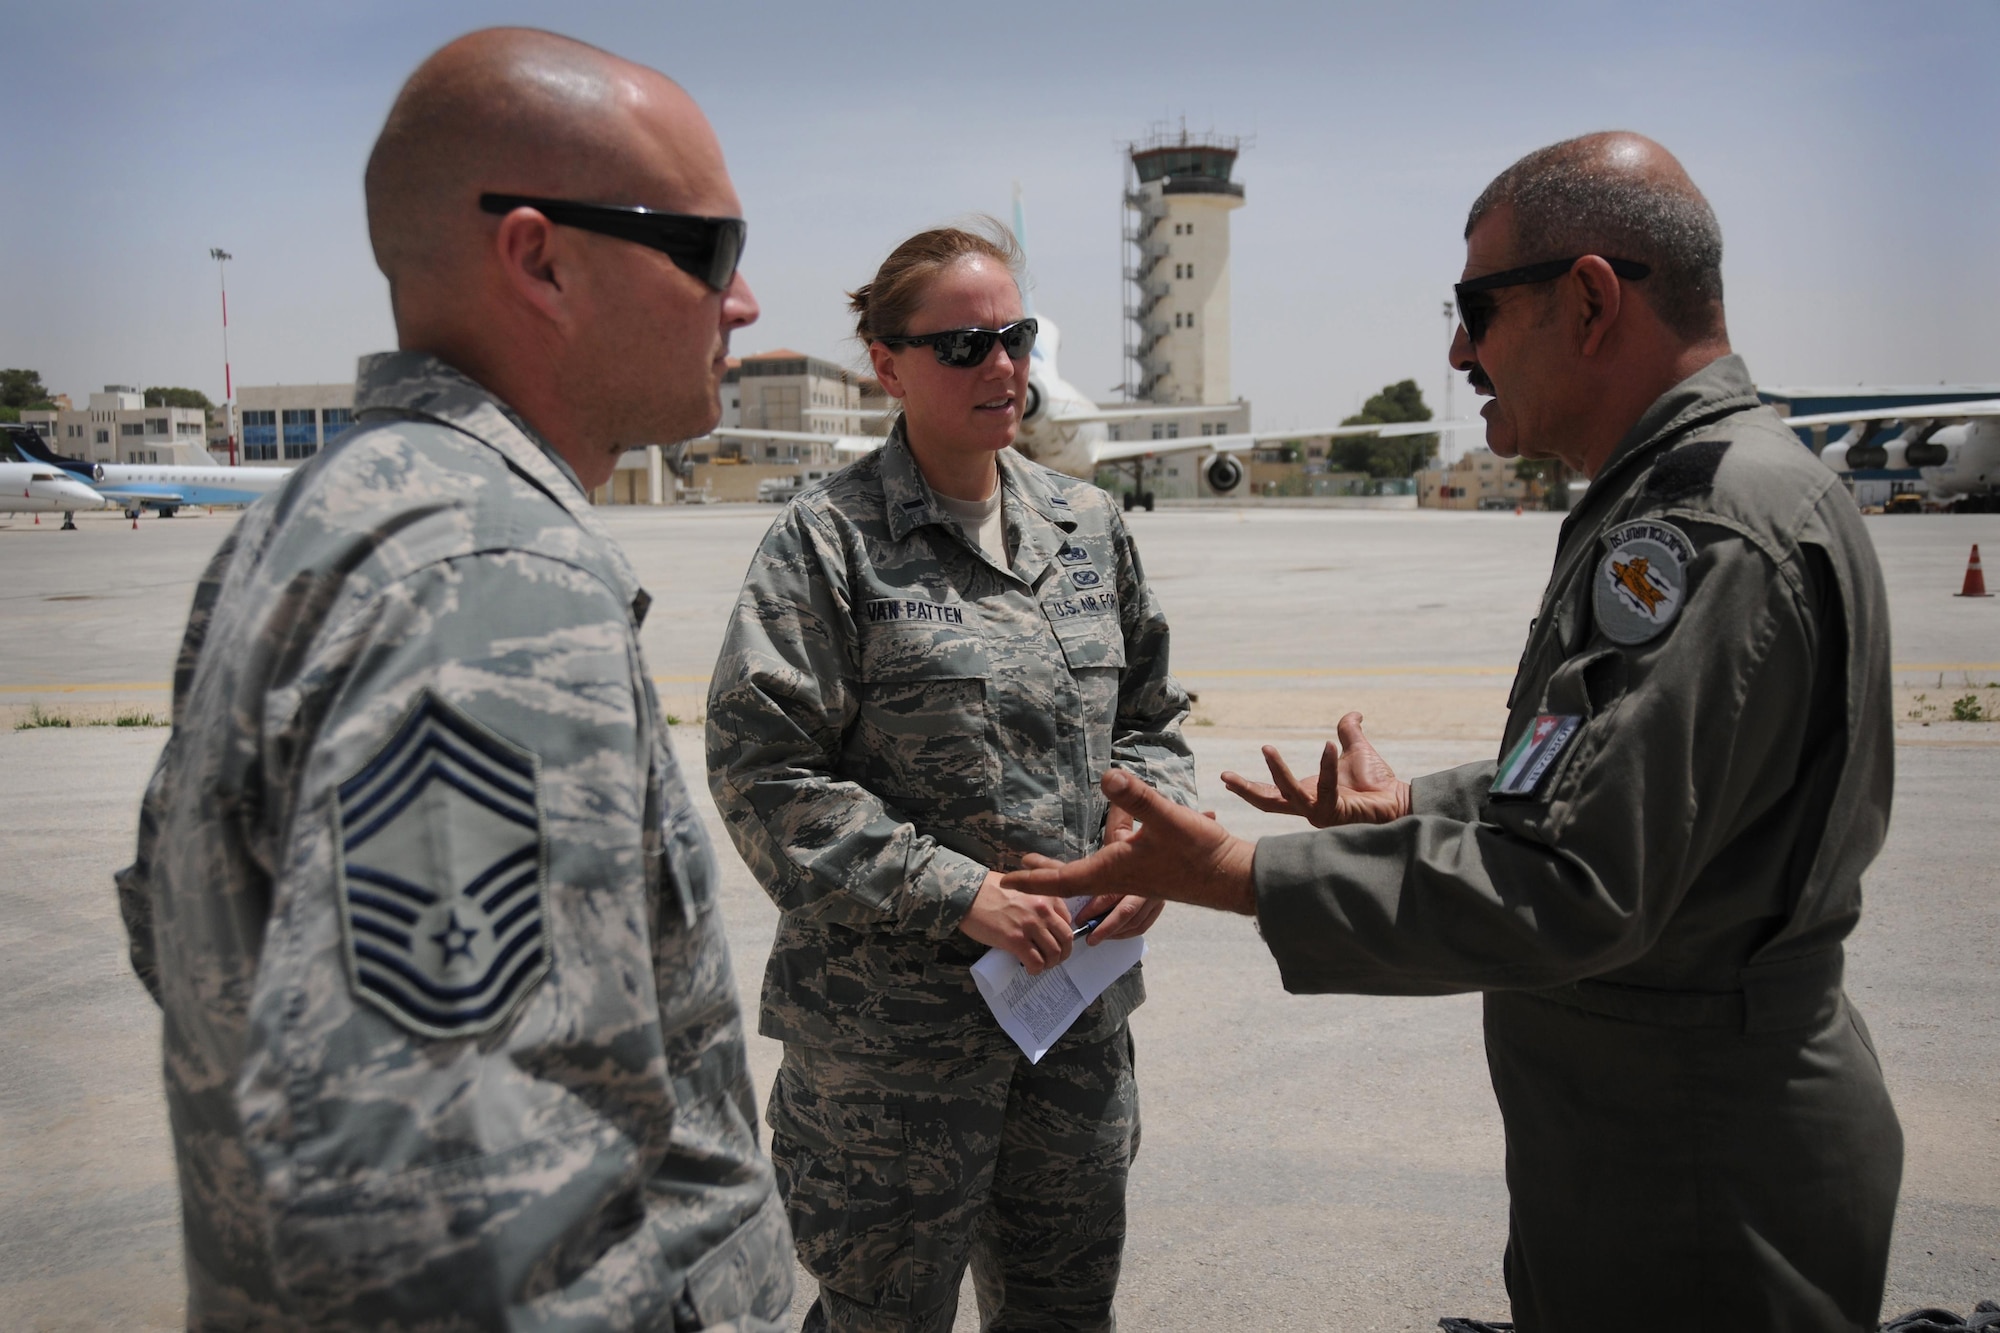 Chief Master Sgt. Marvin Jones, 94th Maintenance Group superintendent, and 1st. Lt. Elizabeth Van Patten, 94th Aircraft Maintenance Squadron officer, discuss C-130 maintenance topics with an Royal Jordanian Air Force C-130 maintenance squadron technician while supporting Exercise Eager Lion, May 15, 2016. This year Eager Lion was a bilaterial exercise including U.S. and Jordanian military forces, held May 15-24. (U.S. Air Force photo/Staff Sgt. Alan Abernethy)